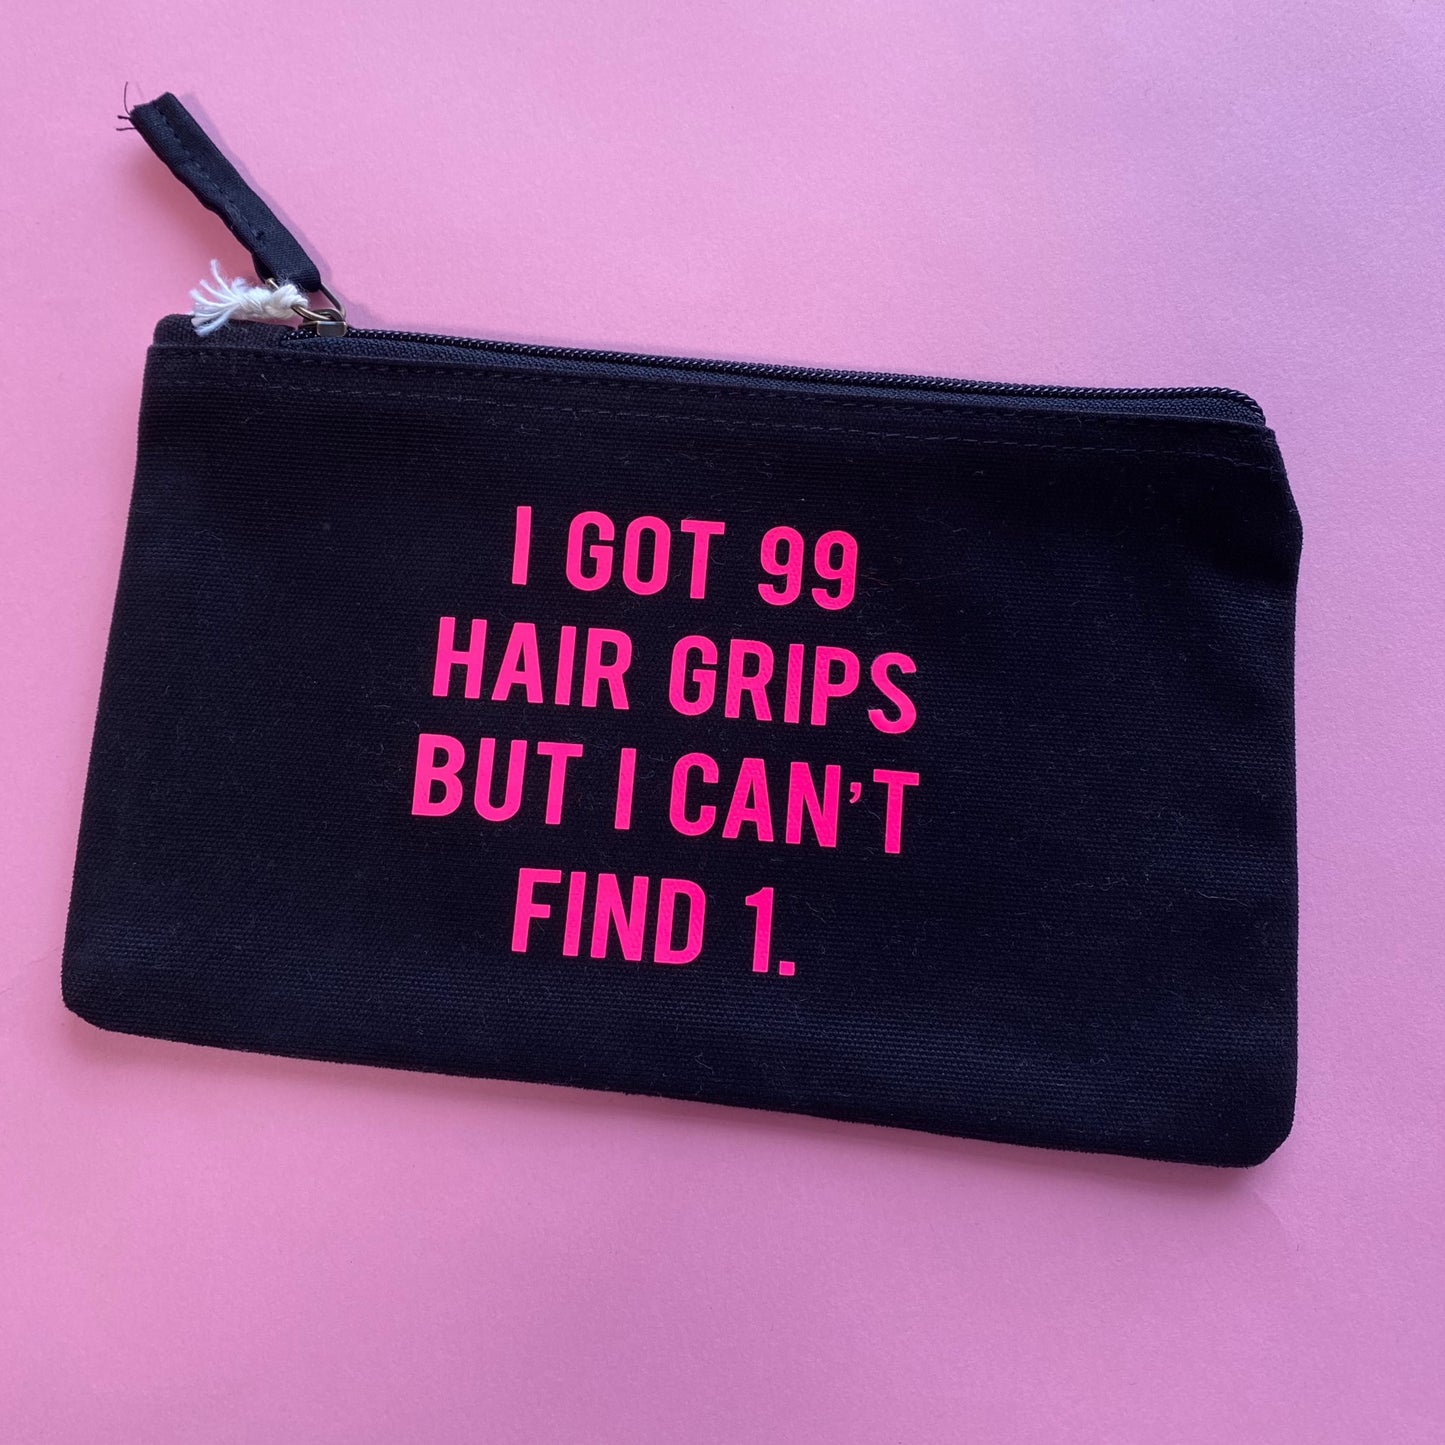 99 Hairgrips But I Can't Find 1 - Cream Small Pencil Case SALE